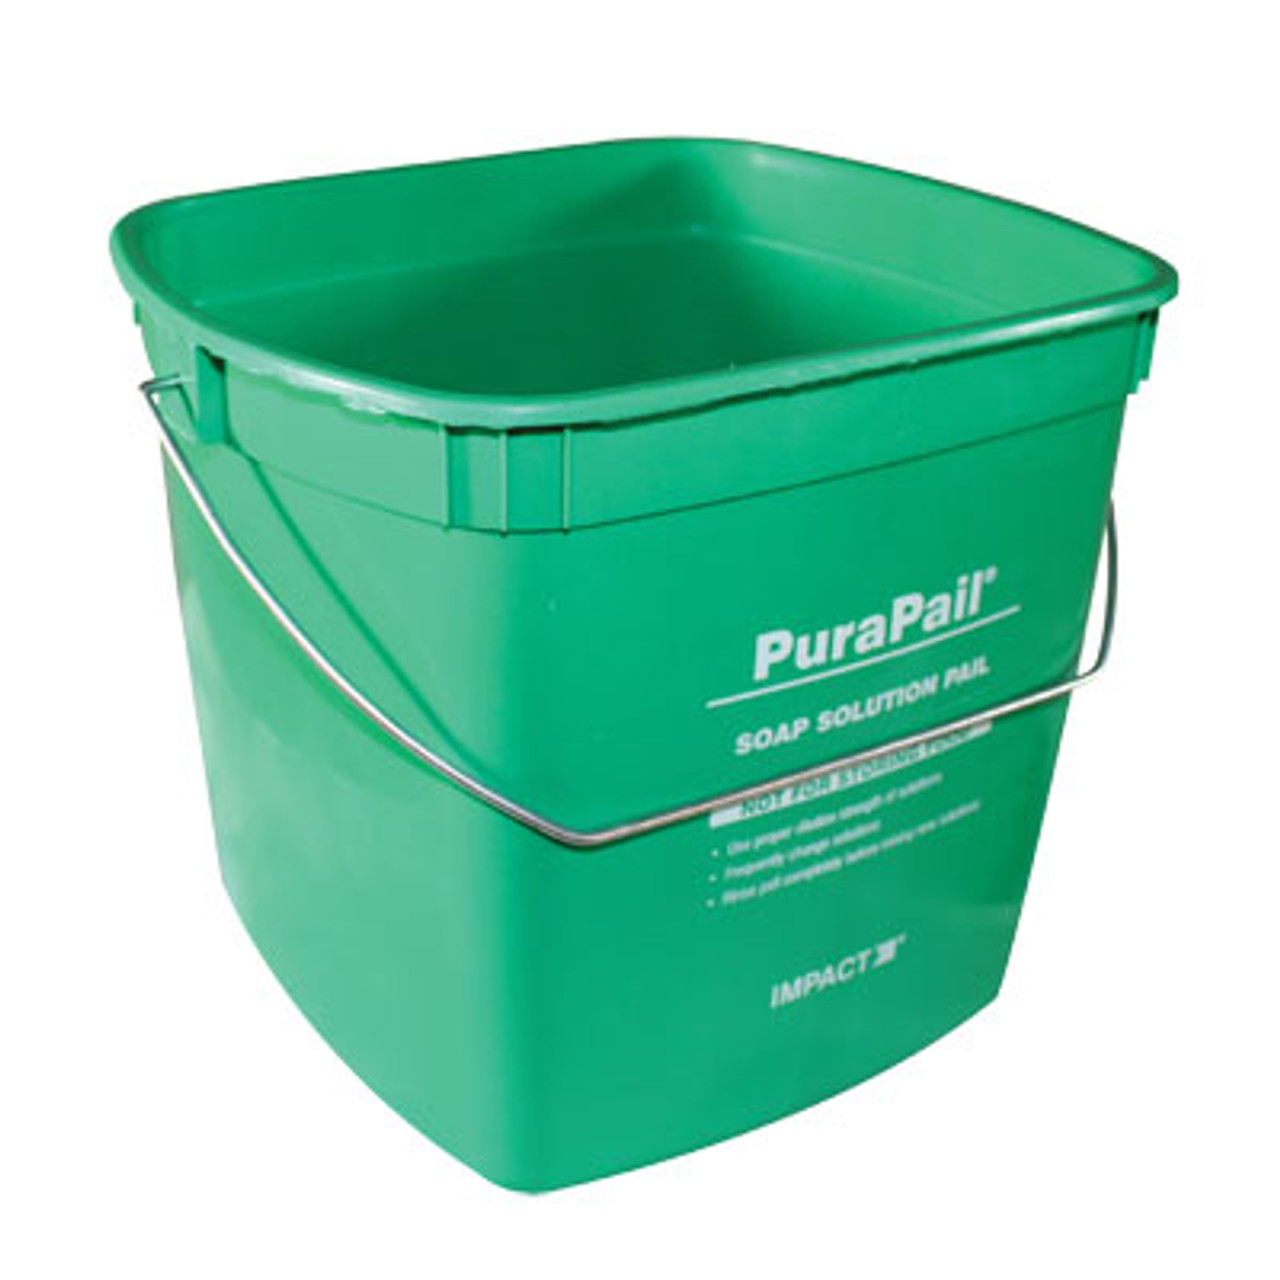 Kleen-Pail Utility Bucket Is 3qt Green For Cleaning